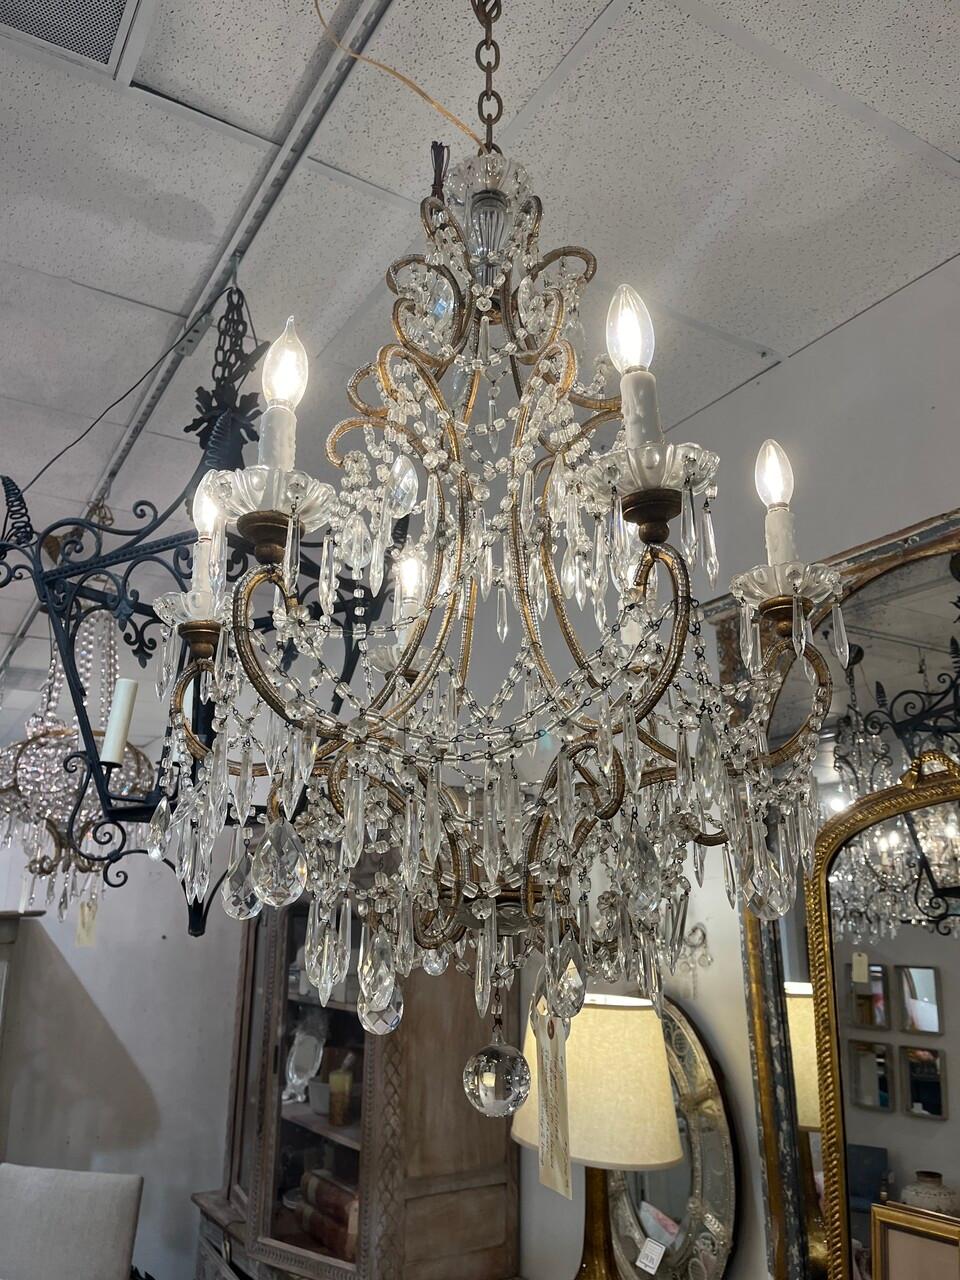 Immerse your space in the opulence of the 19th Century with this resplendent Italian gilt chandelier. Meticulously restored, it gleams anew with its shimmering gold finish. Freshly rewired and adorned with new candle sleeves, it radiates timeless